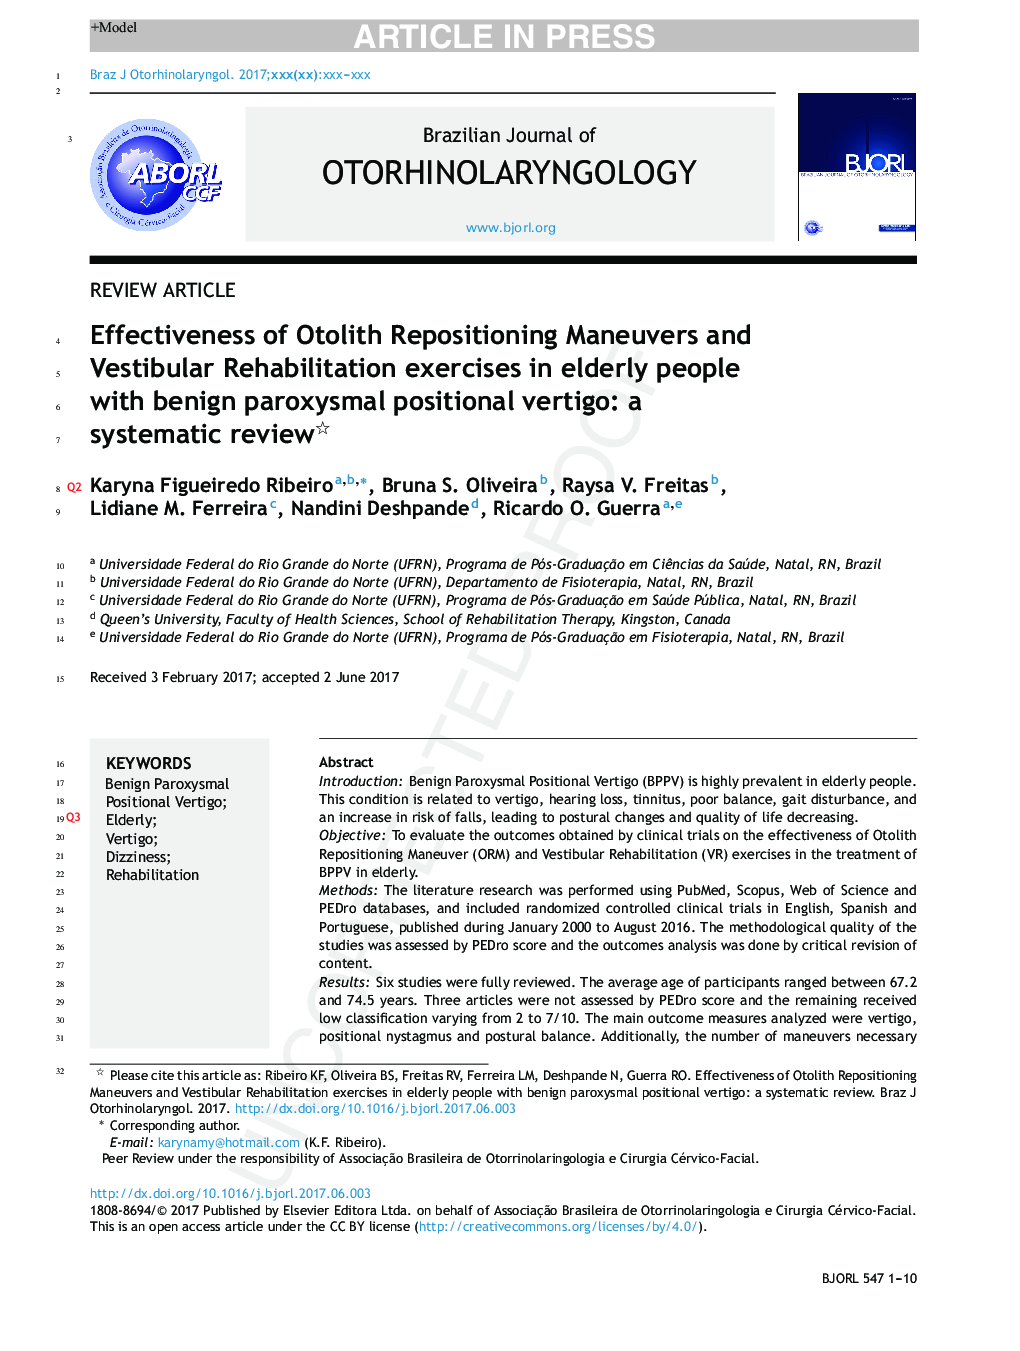 Effectiveness of Otolith Repositioning Maneuvers and Vestibular Rehabilitation exercises in elderly people with Benign Paroxysmal Positional Vertigo: a systematic review